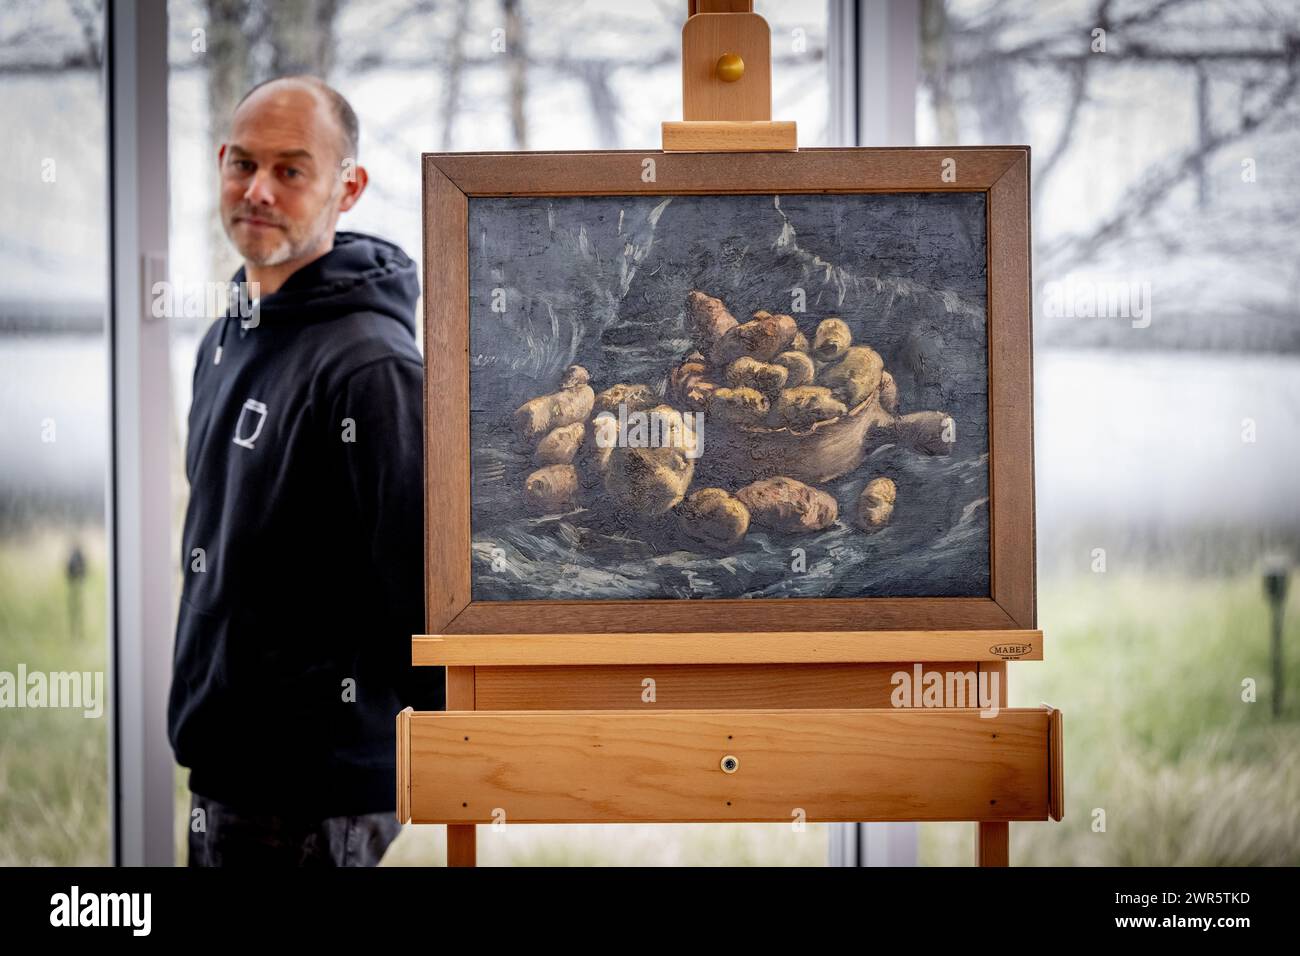 ROTTERDAM - Museum Boijmans Van Beuningen has acquired Vincent van Gogh's Still Life with Potatoes (Paris, winter 1886-87). With this new purchase, the Rotterdam museum's collection contains a total of seven paintings by Van Gogh. ANP ROBIN UTRECHT netherlands out - belgium out Stock Photo